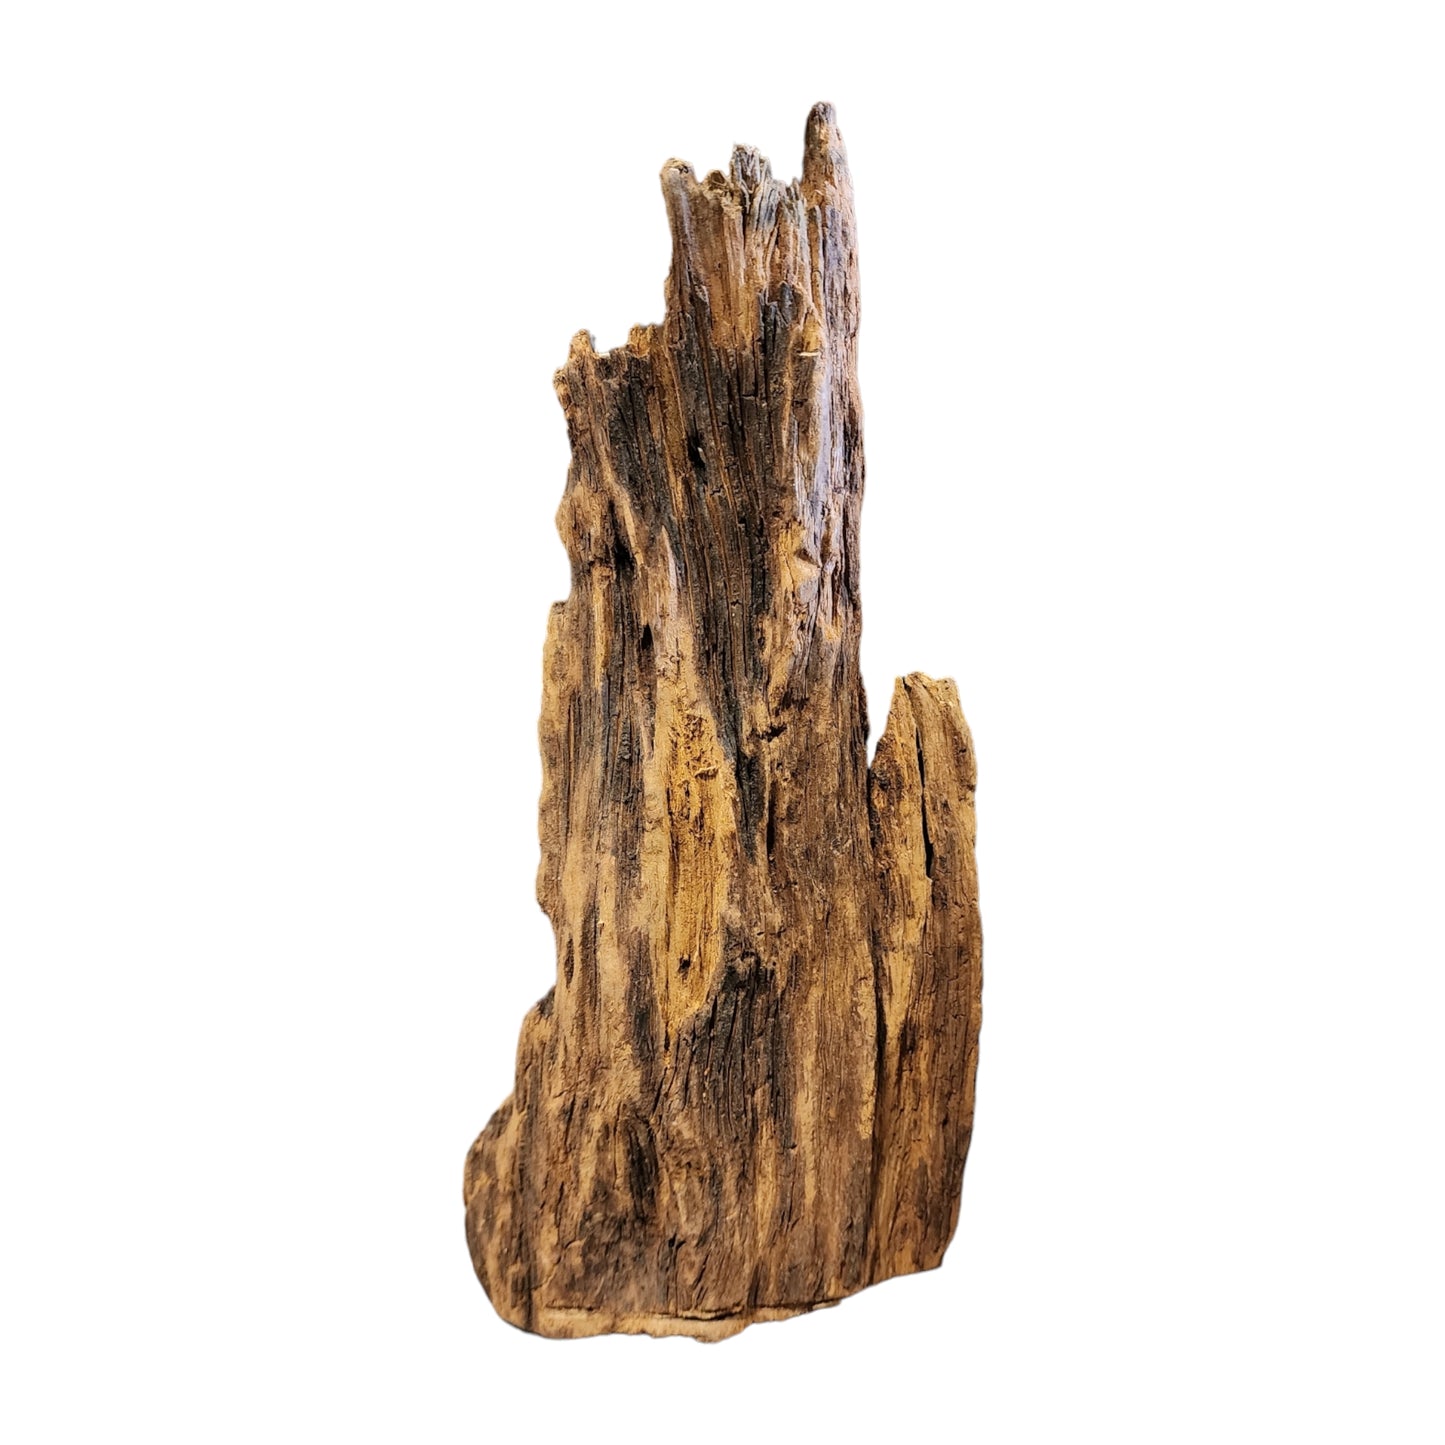 7 to 9.75 inch - TEXTURE DRIFTWOOD - Small <25cm - Indonesia - NEW923 - #1